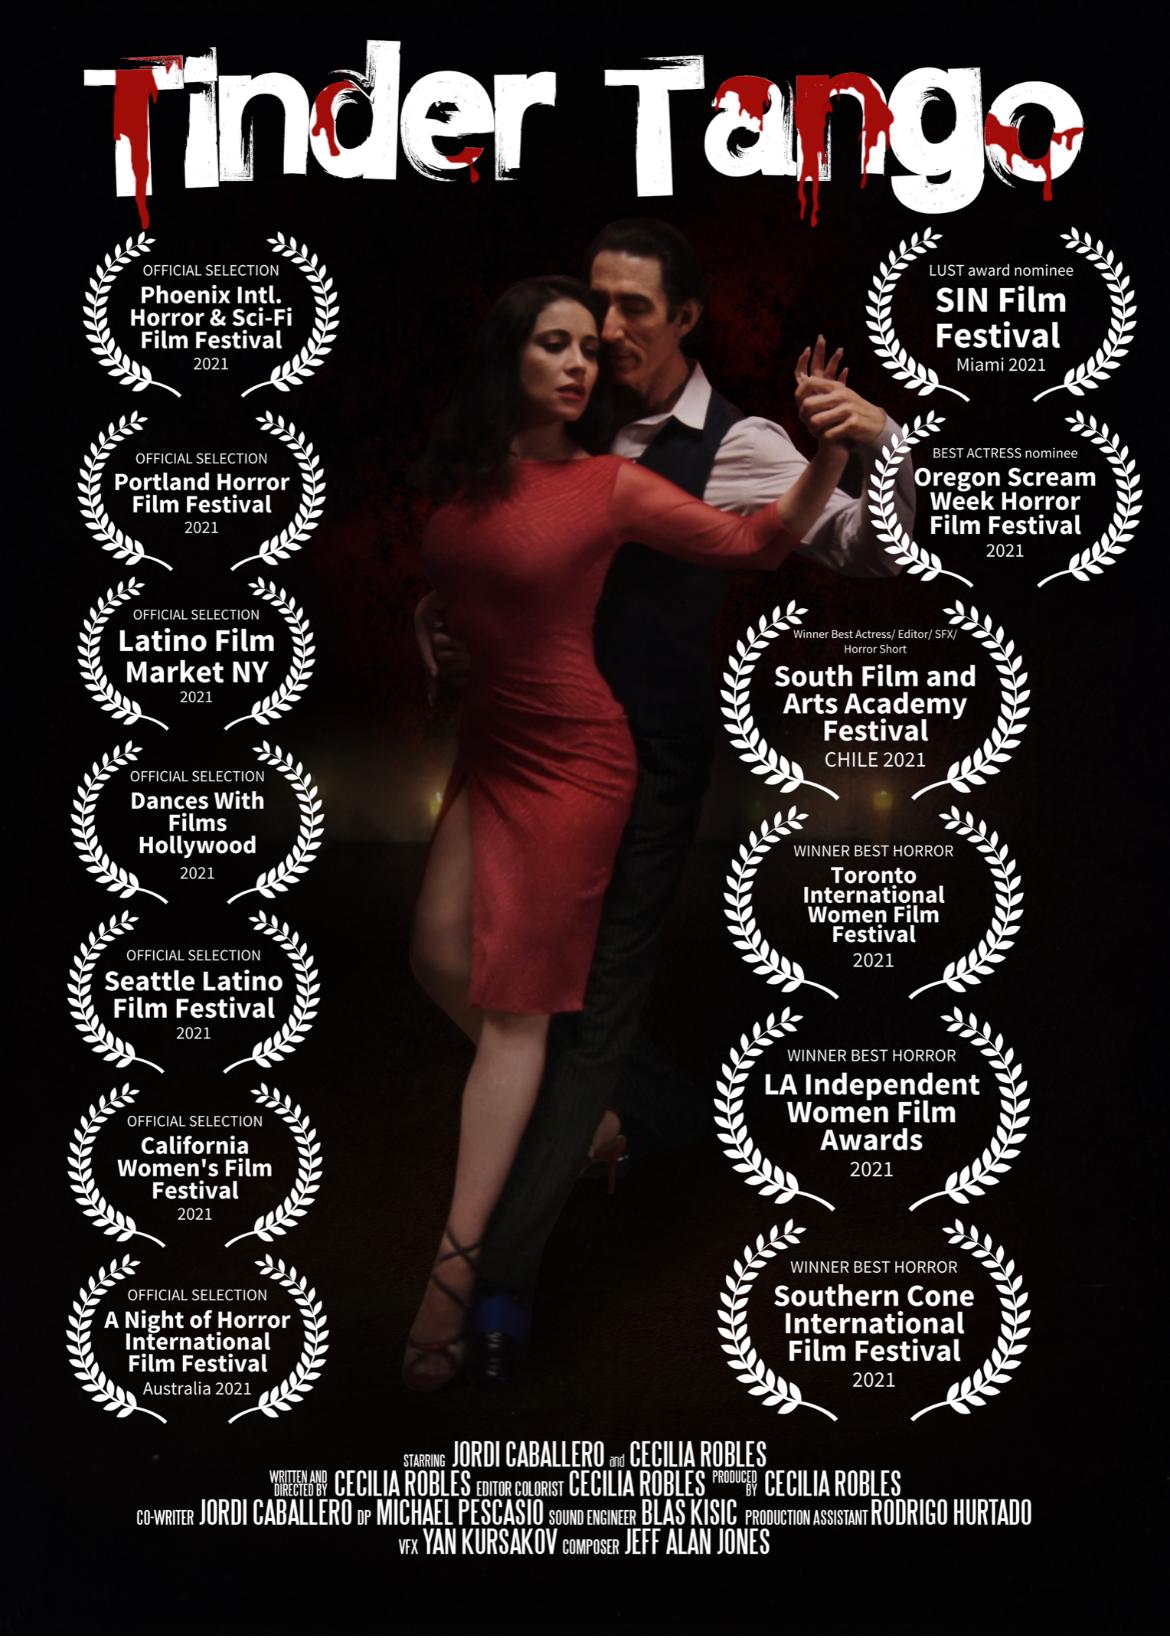 TINDER TANGO ANNOUNCED AS  OFFICIAL SELECTION OF  DANCES WITH FILMS FESTIVAL